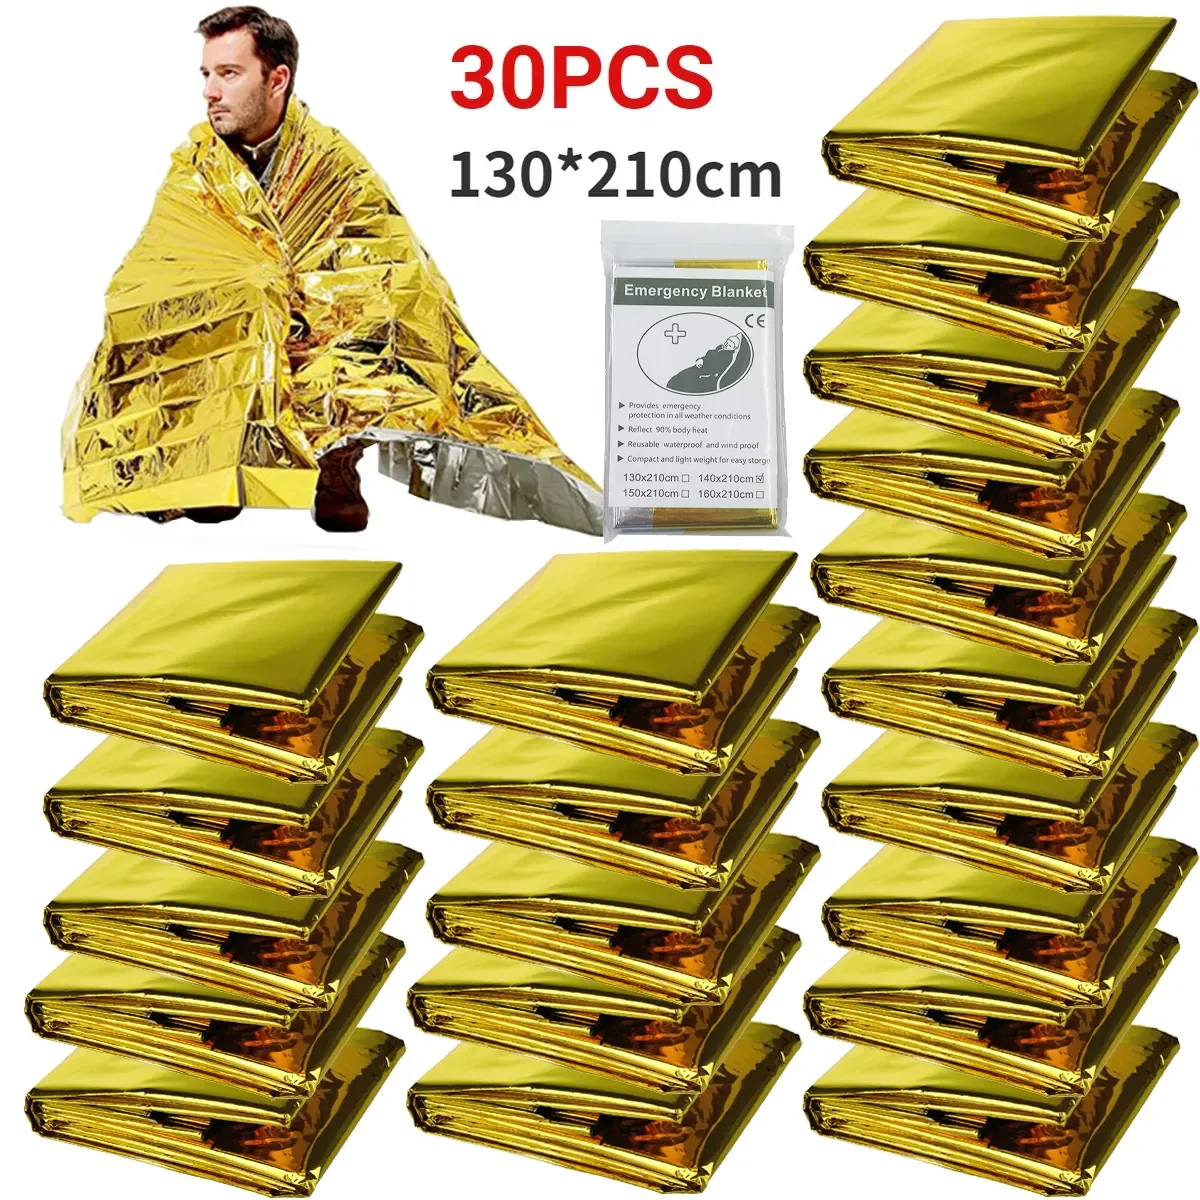 

5-30pcs Outdoor Emergency Survival Blanket First Aid Rescue Kit Gold-Silver Waterproof Foil Thermal Camping Military Blanket Hot